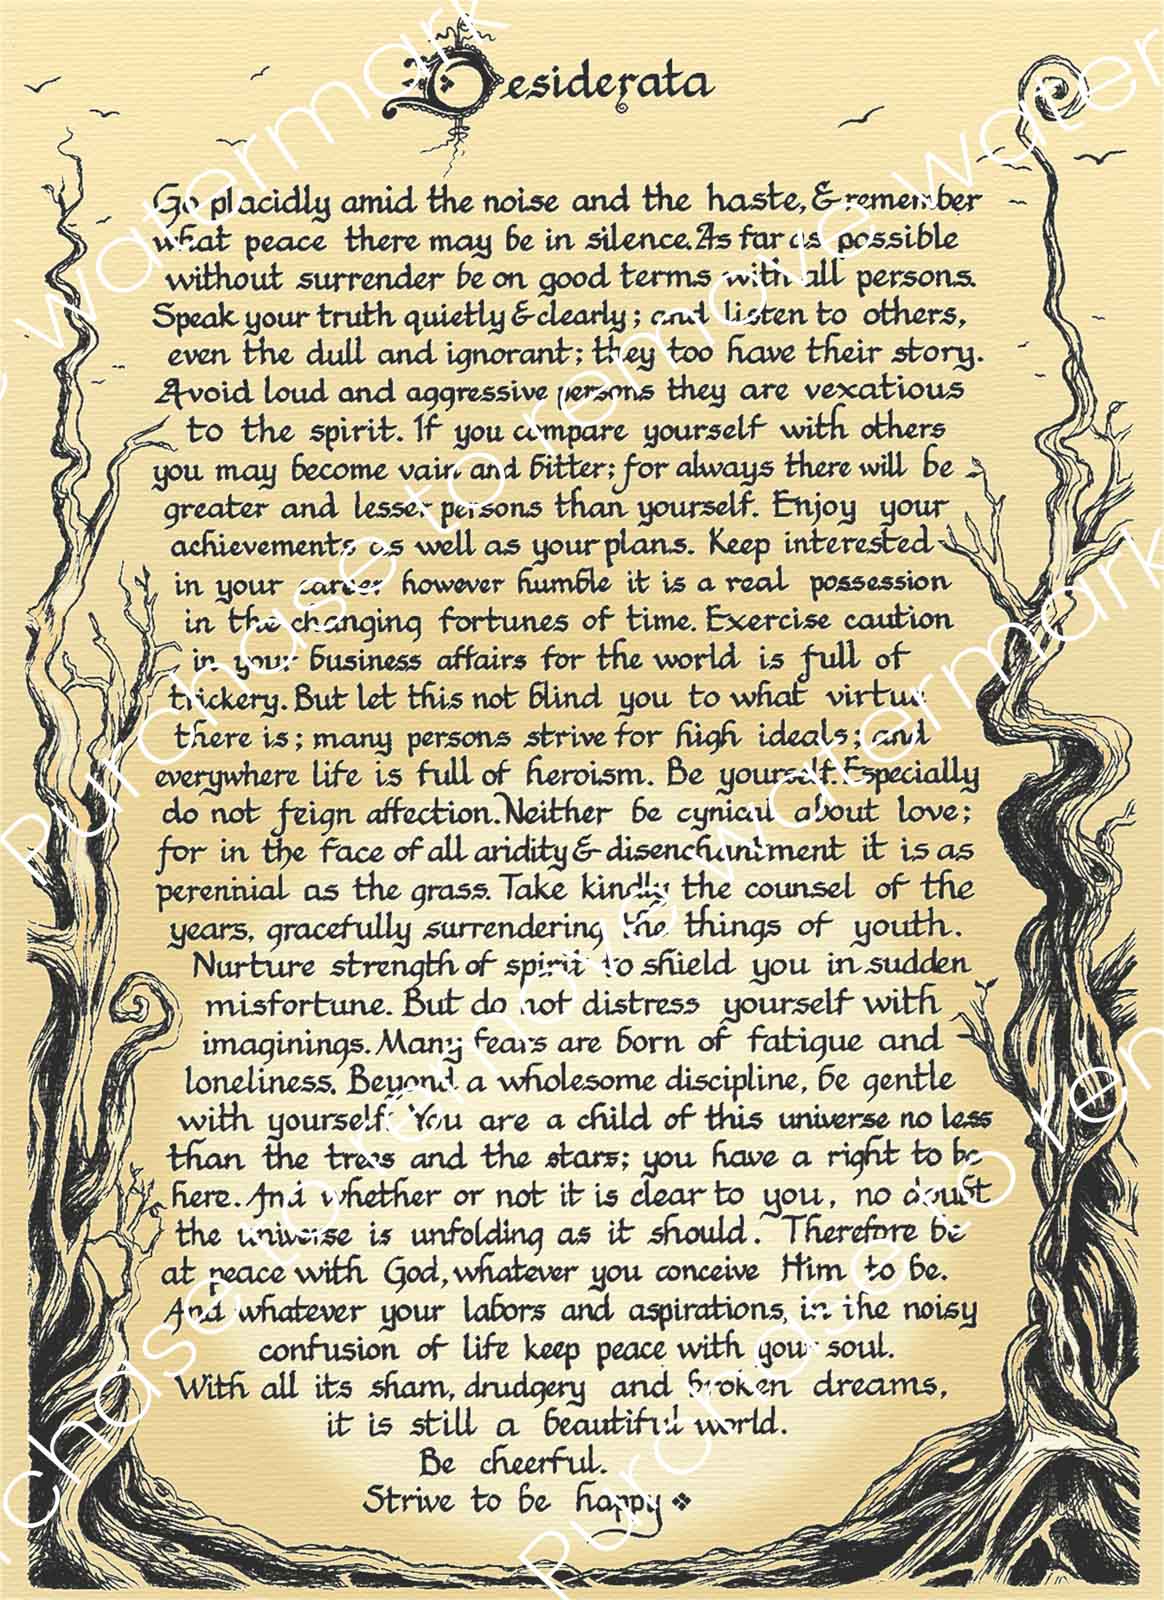 Desiderata - digital download for print, with decorative ink drawing of trees and calligraphic writing.

Desiderata is a wonderful poem for contemplation and mindfulness practice. In my youth, I was touched when I first read this poem, inspiring me some years back to draw one out for myself, with artwork to reflect the feel of the poem. 

Neil Wilkinson-Cave